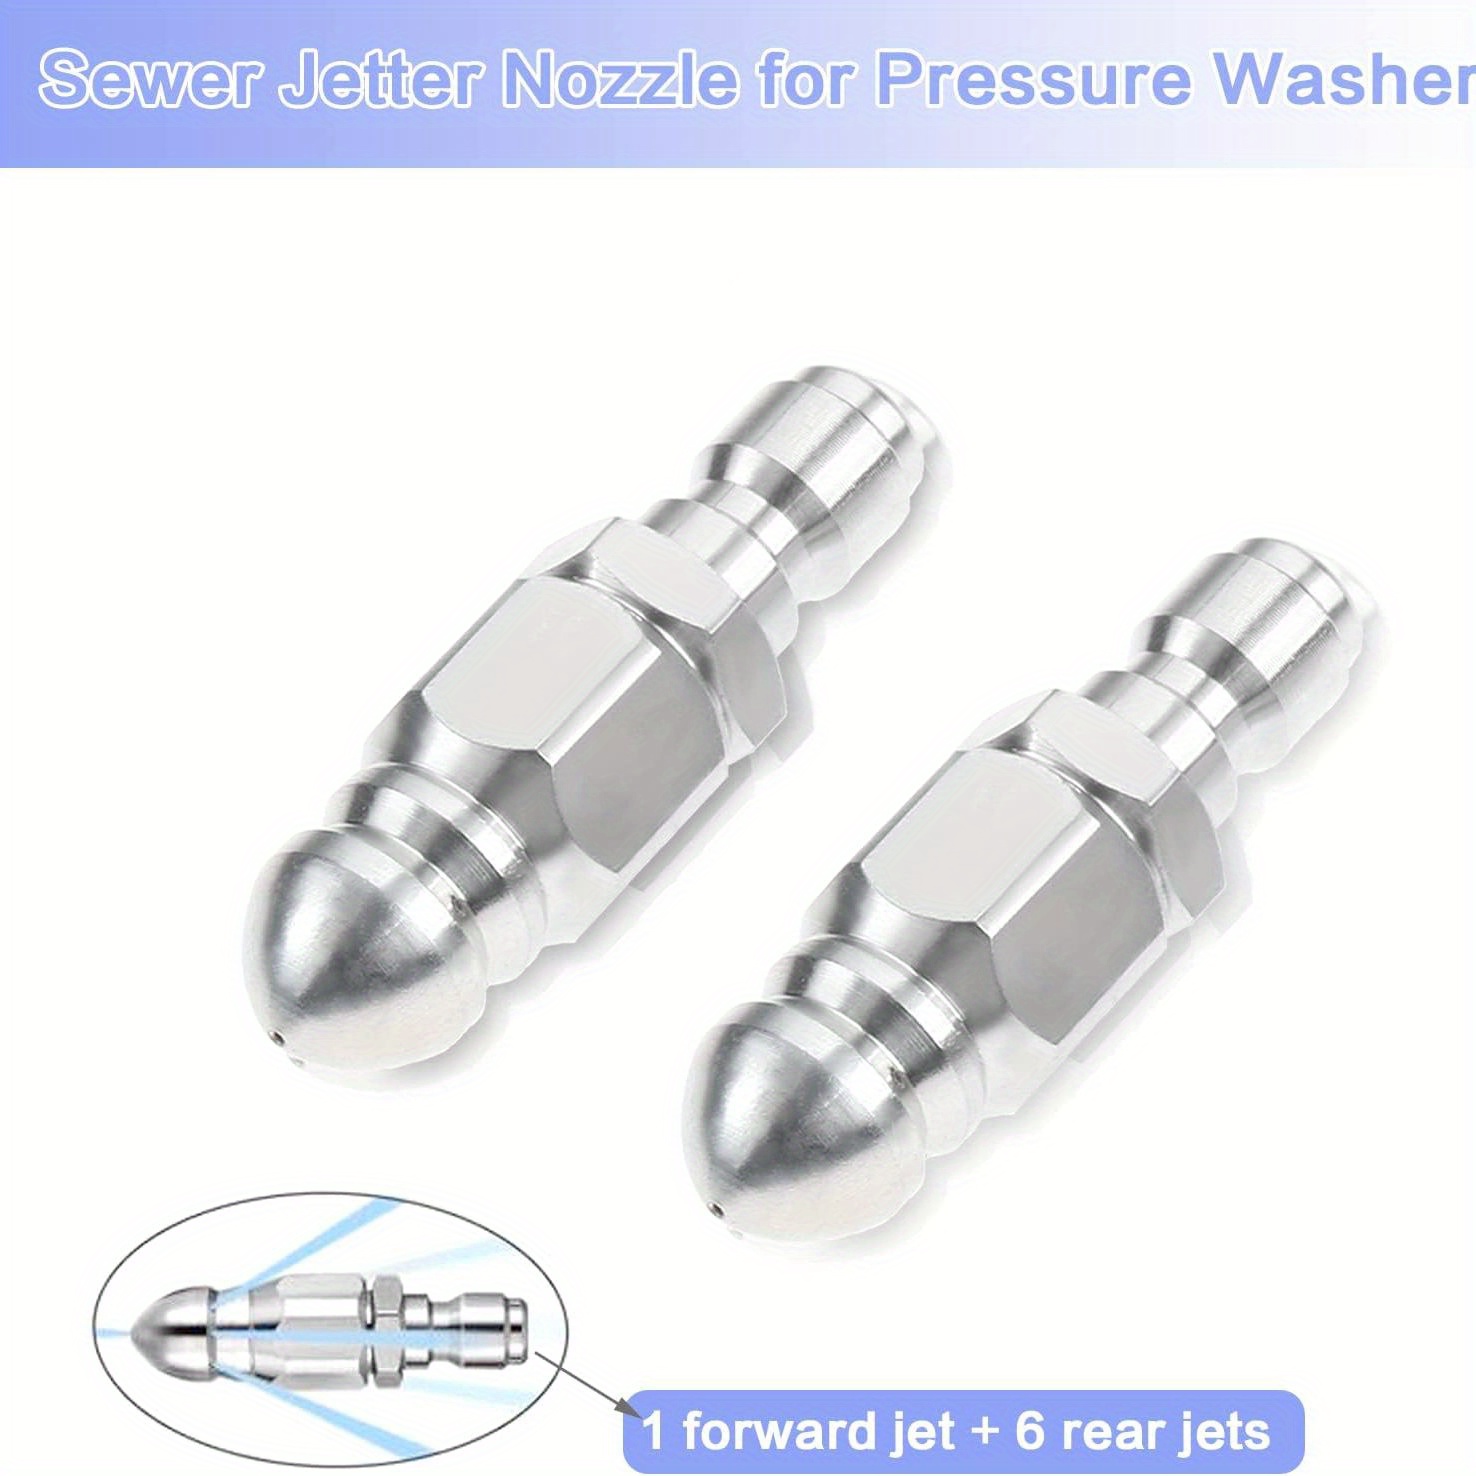 Pressure Washer Accessories  Accessories for Sewer Jetters